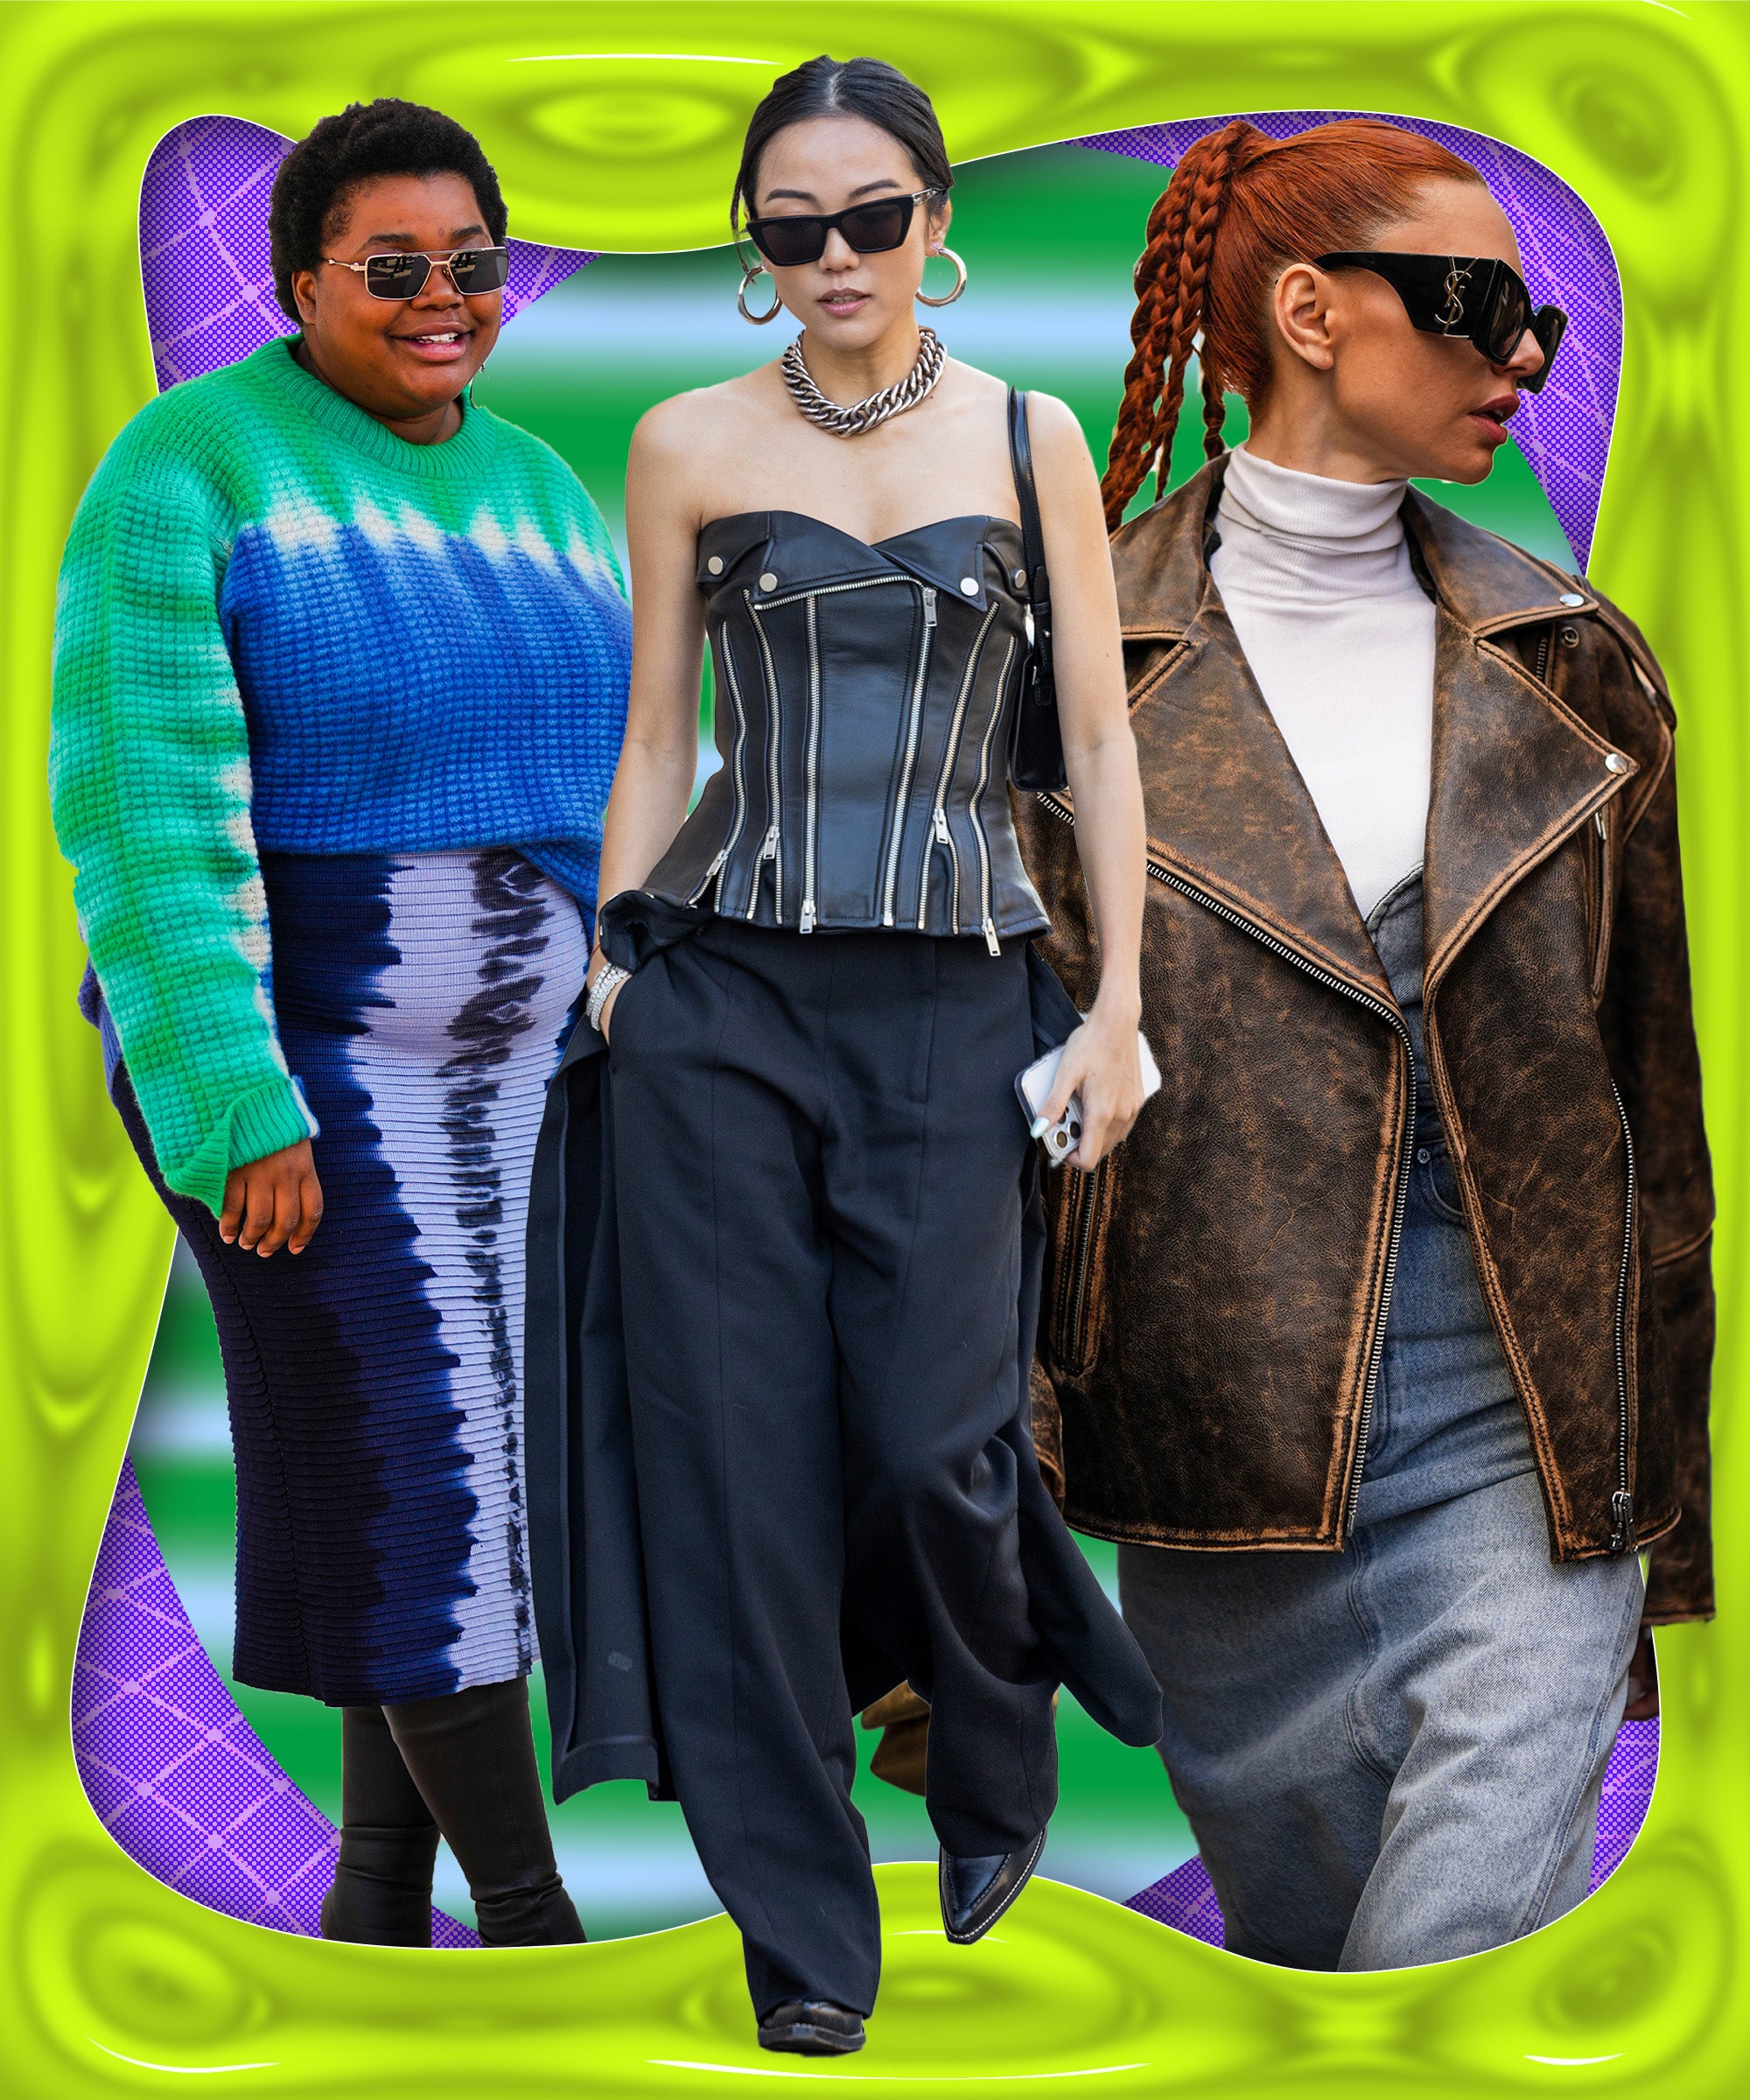 Street Style Trends To Try For Summer 2023